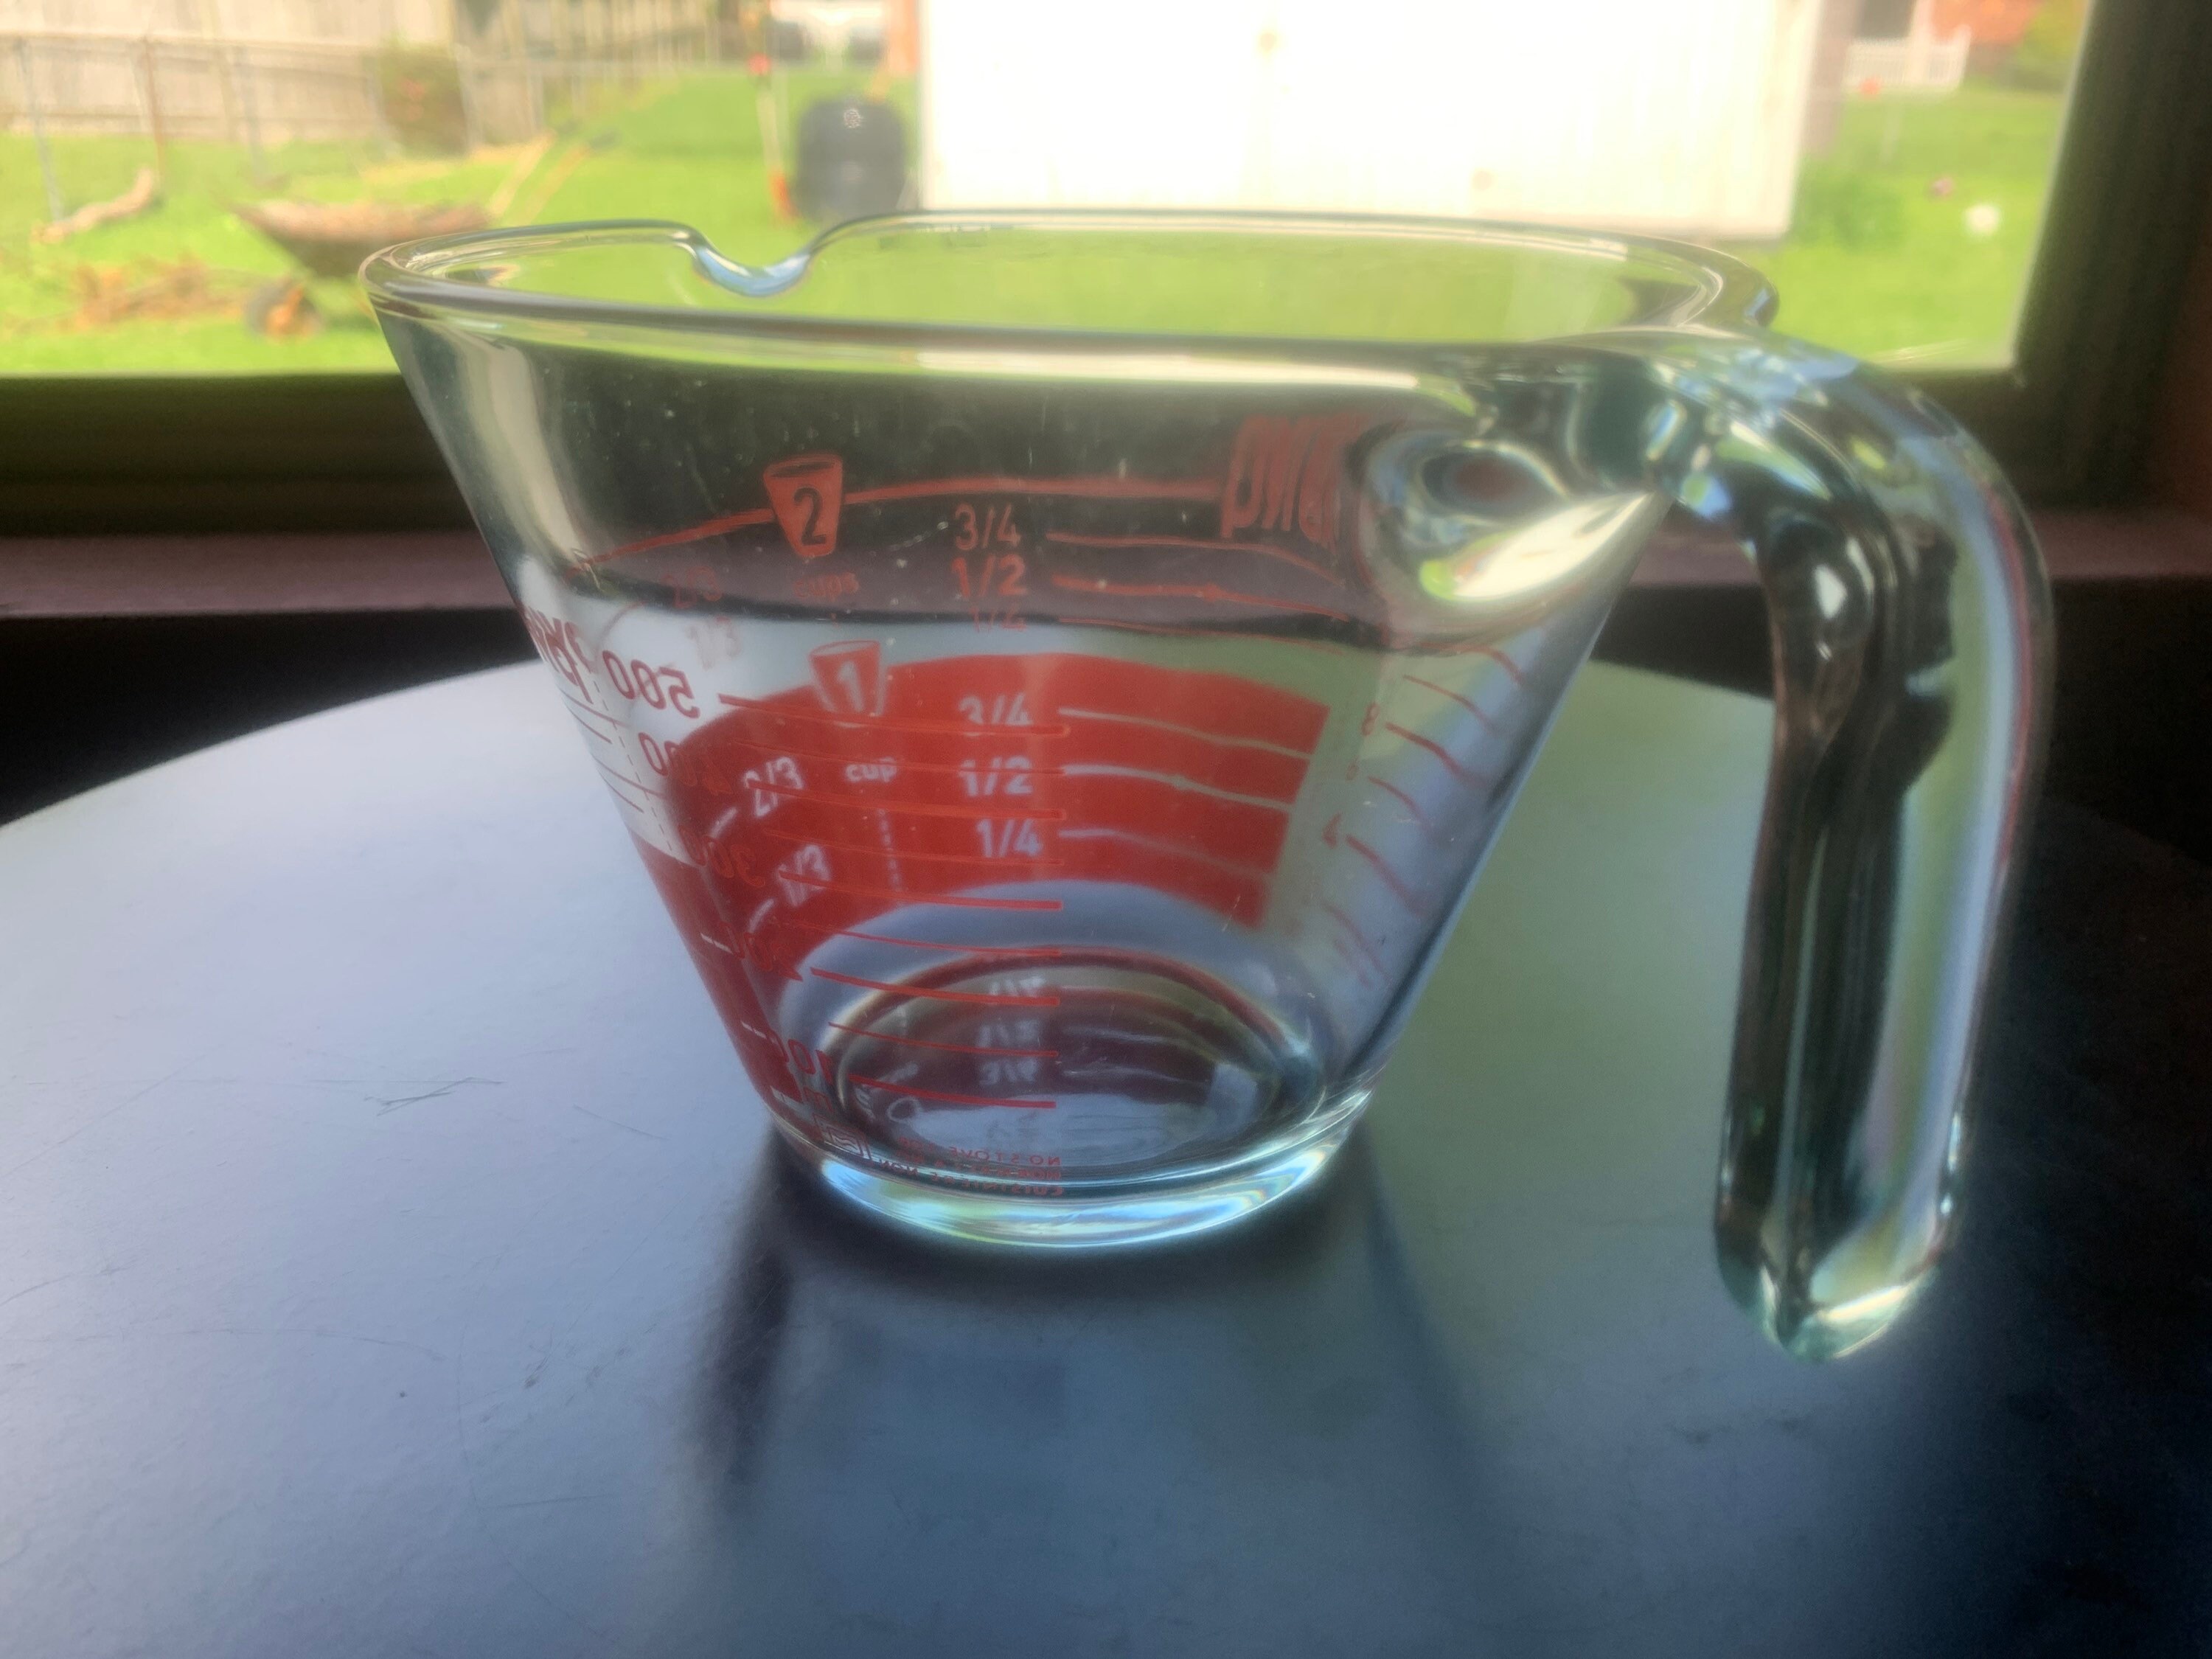 Pyrex Glass 2 Cup Measuring Cup USA and 19 similar items